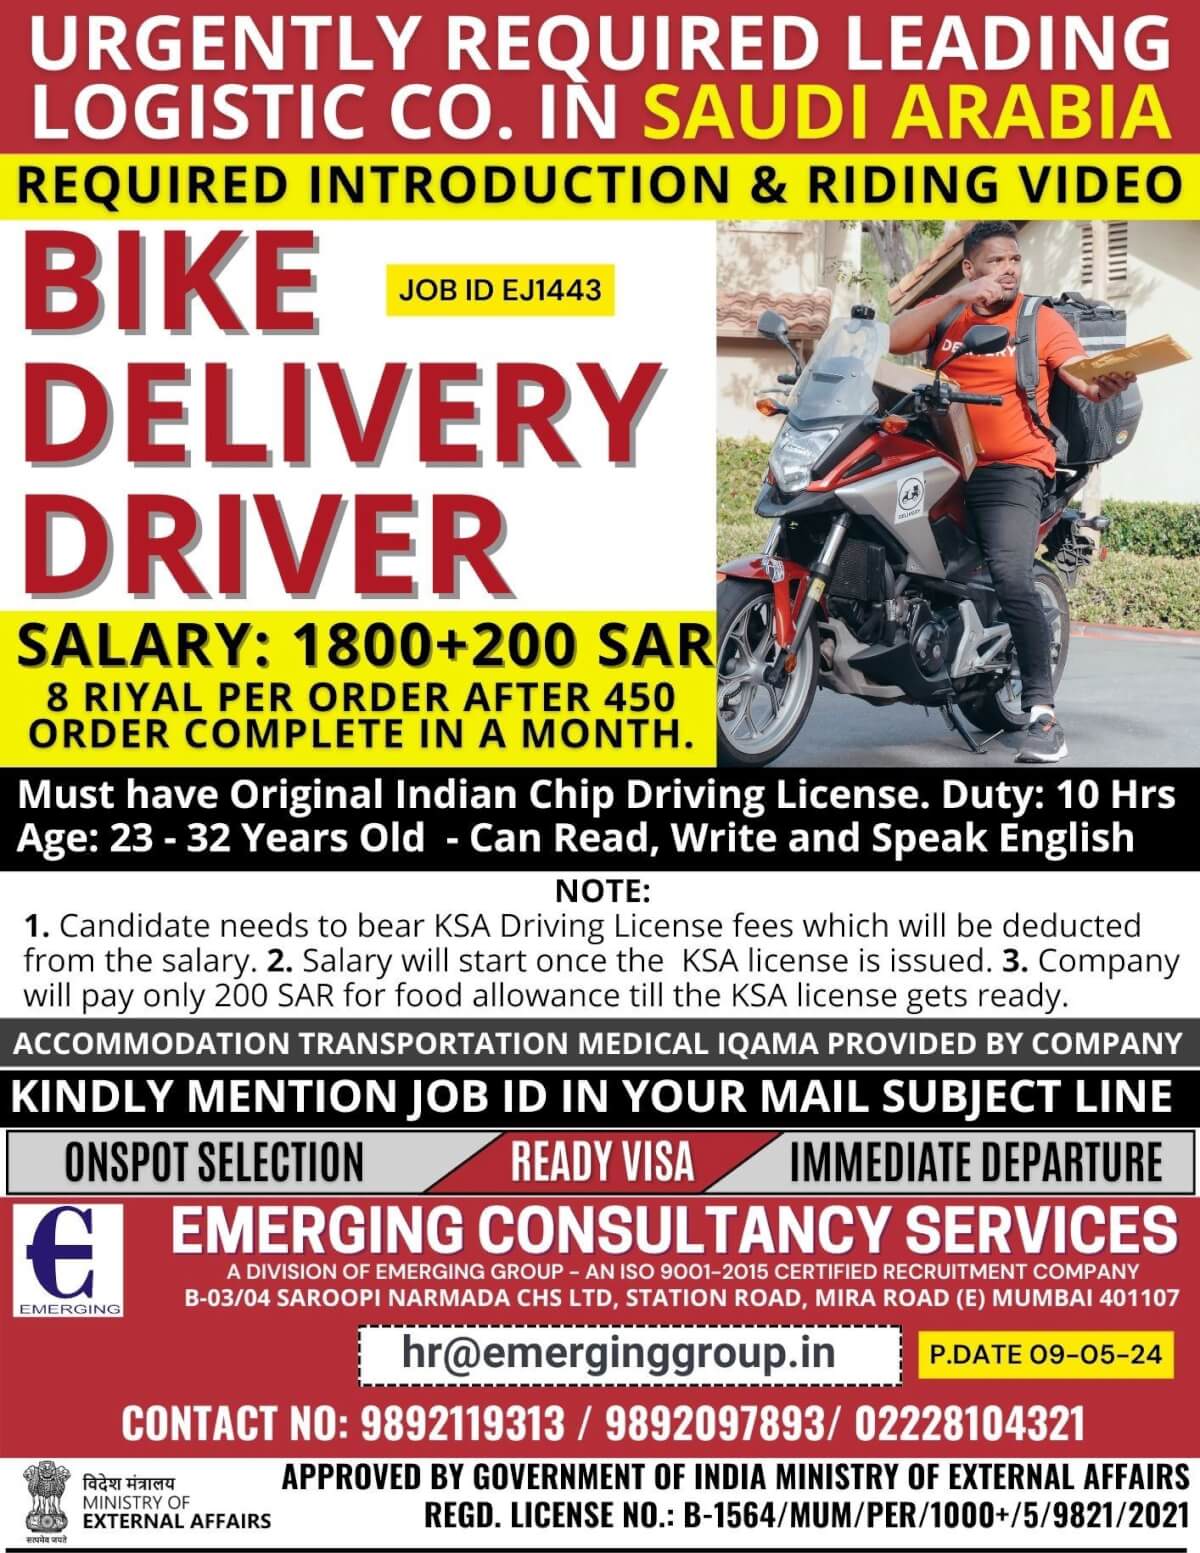 URGENTLY REQUIRED FOR BIKE DELIVERY DRIVER FOR LOGISTIC LEADING COMPANY IN SAUDI ARABIA.